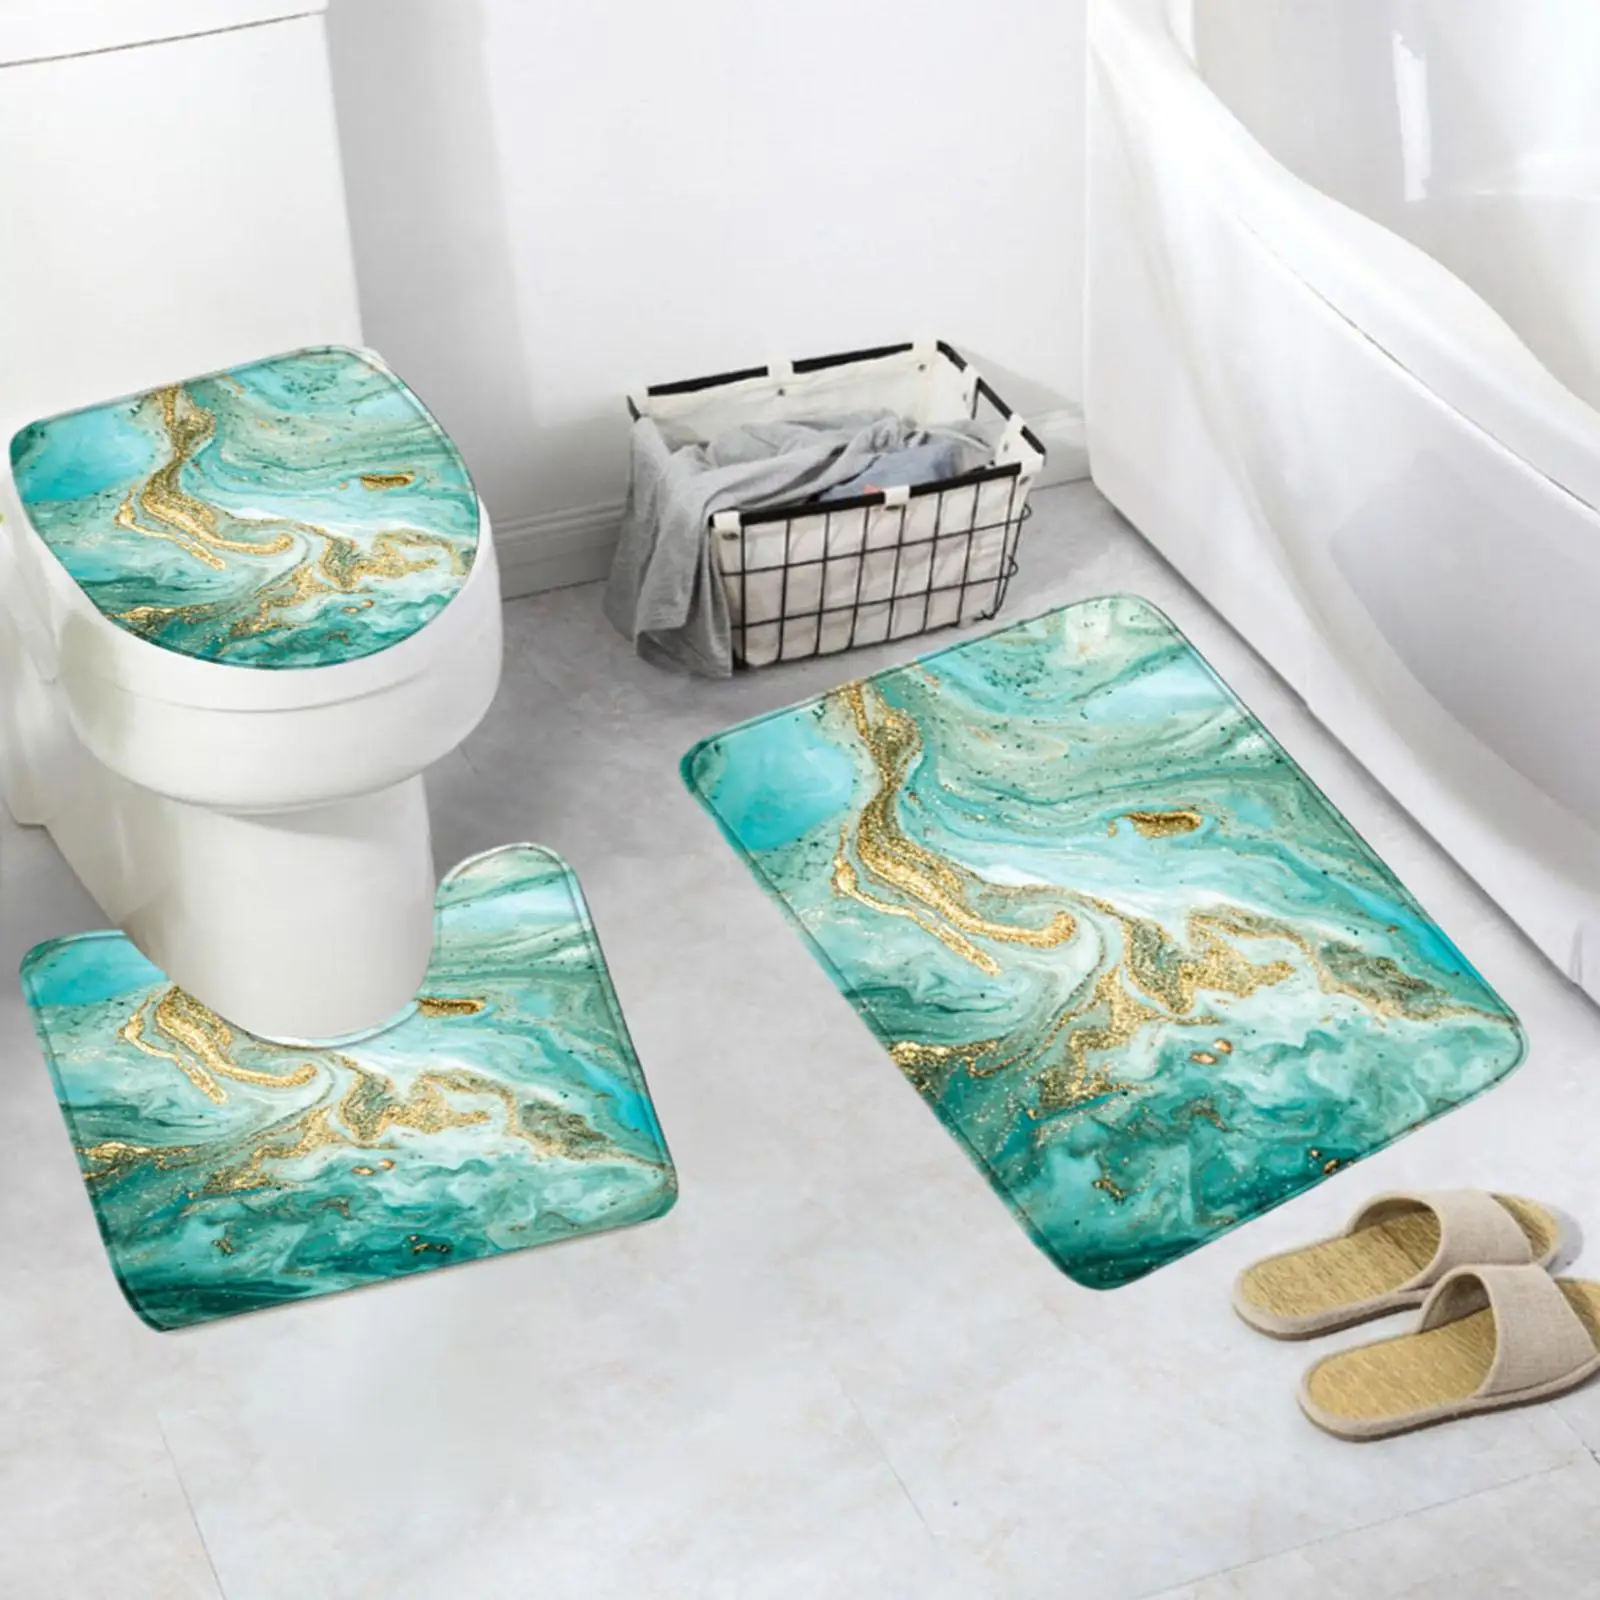 3 Pieces Bathroom Rug Set Non Slip Backing Floor Rugs Mat Super Soft and Comfortable U Shape Contour Rug Water Absorbent